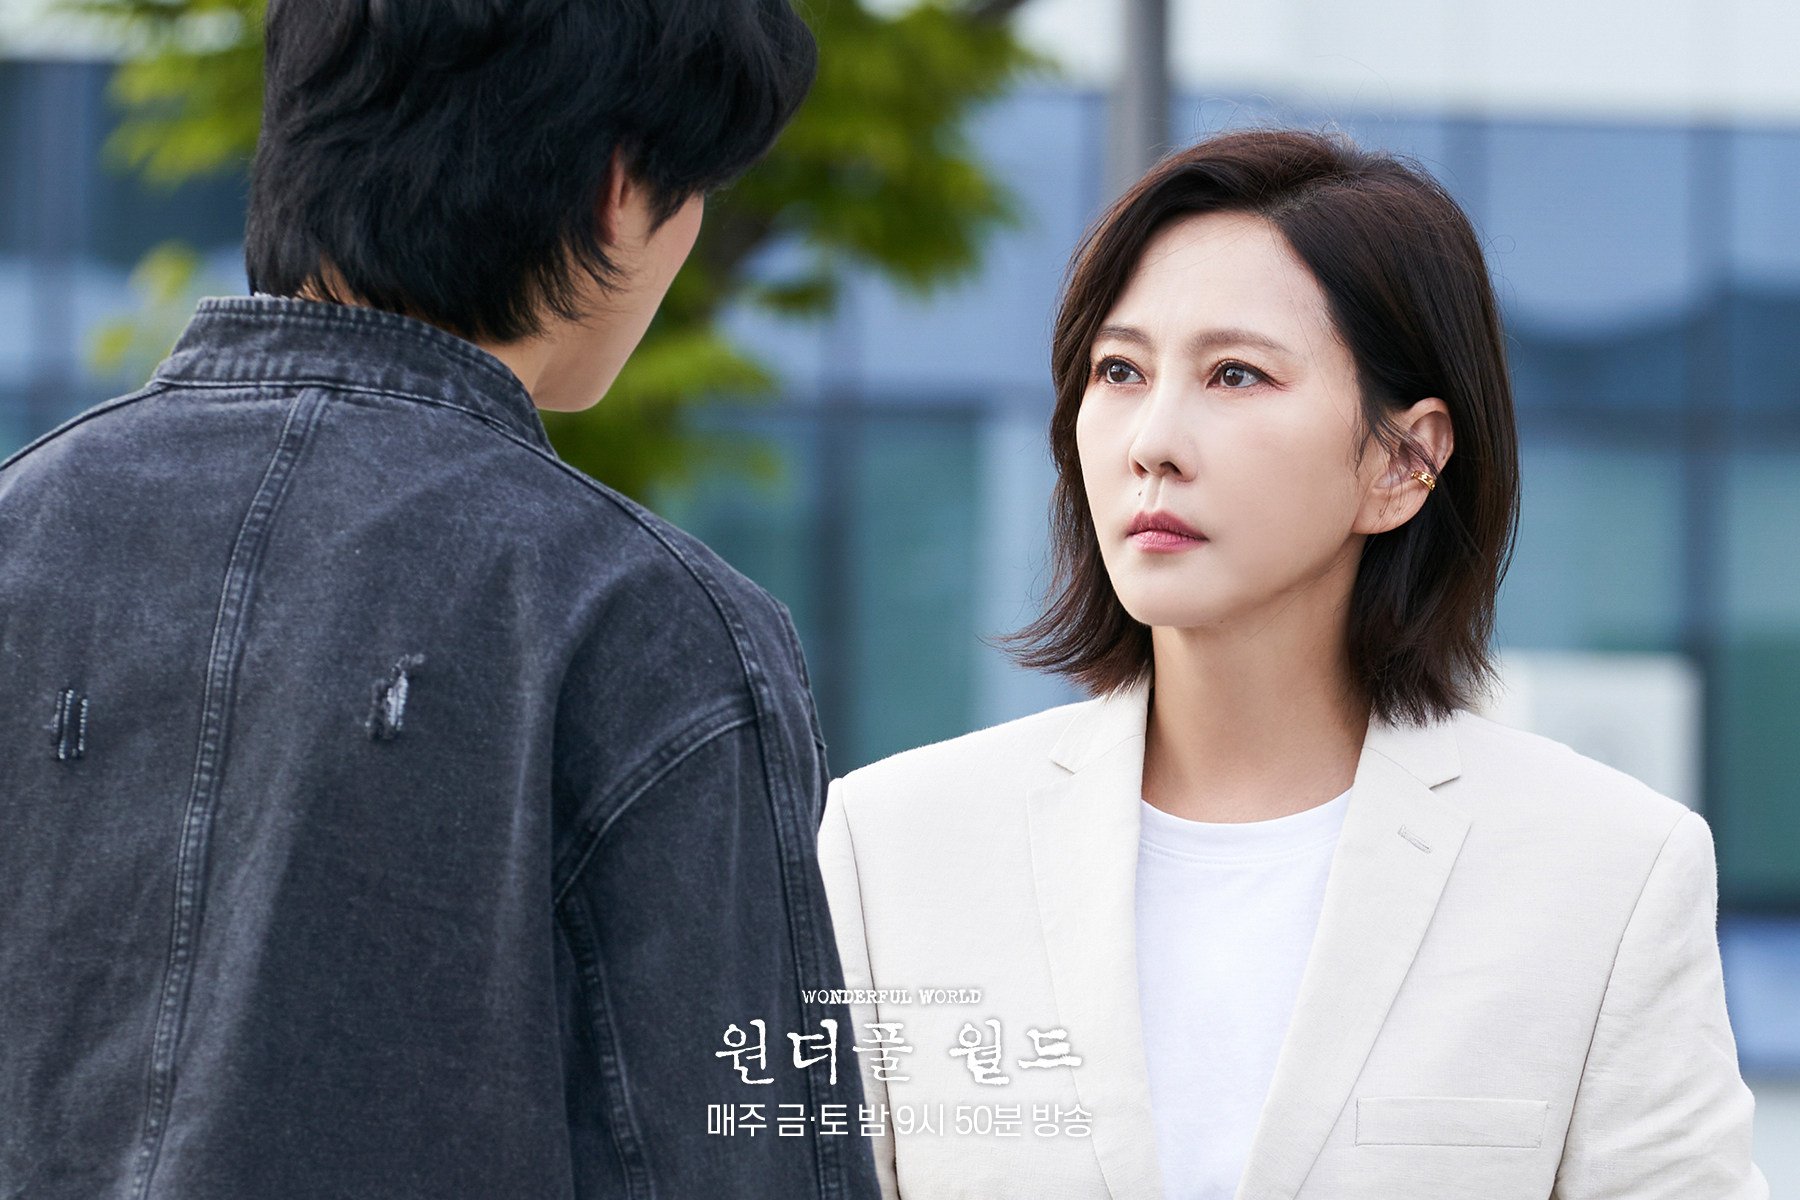 Cha Eun-woo (left) and Kim Nam-joo as the mysterious Kwon Seon-yul and author Eun Soo-hyun in a still from Wonderful World. At midseason the pieces are falling into place for a satisfying conclusion to the Disney+ K-drama.